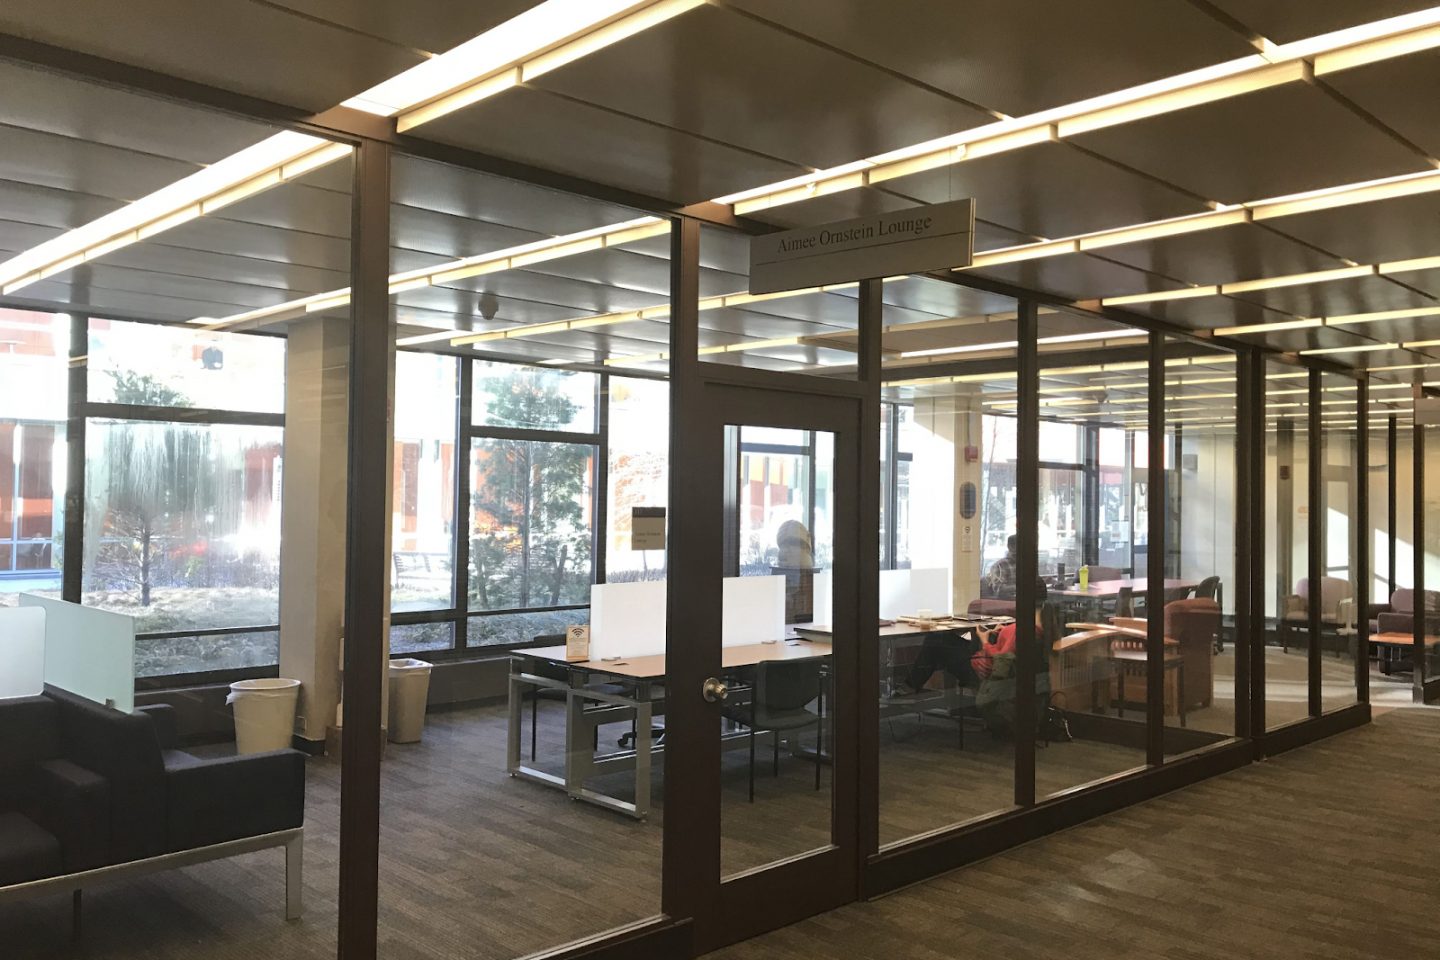 A view of the spacious study areas in the Aimee Ornstein Lounge